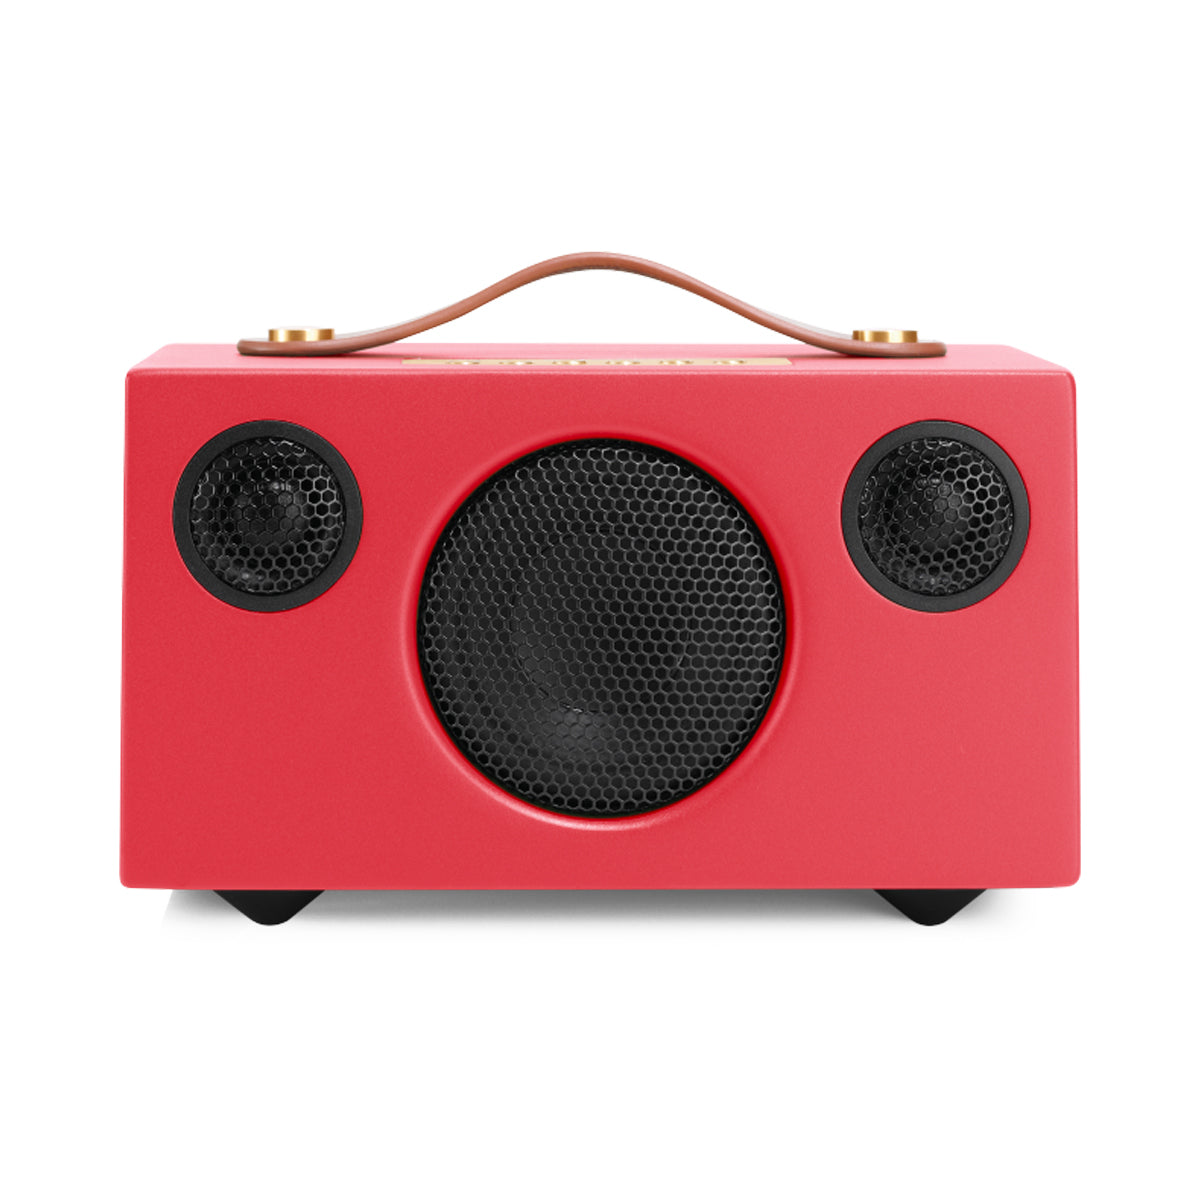 Audio Pro Addon T3+ Portable Bluetooth Speaker - Coral Red - The Audio Experts